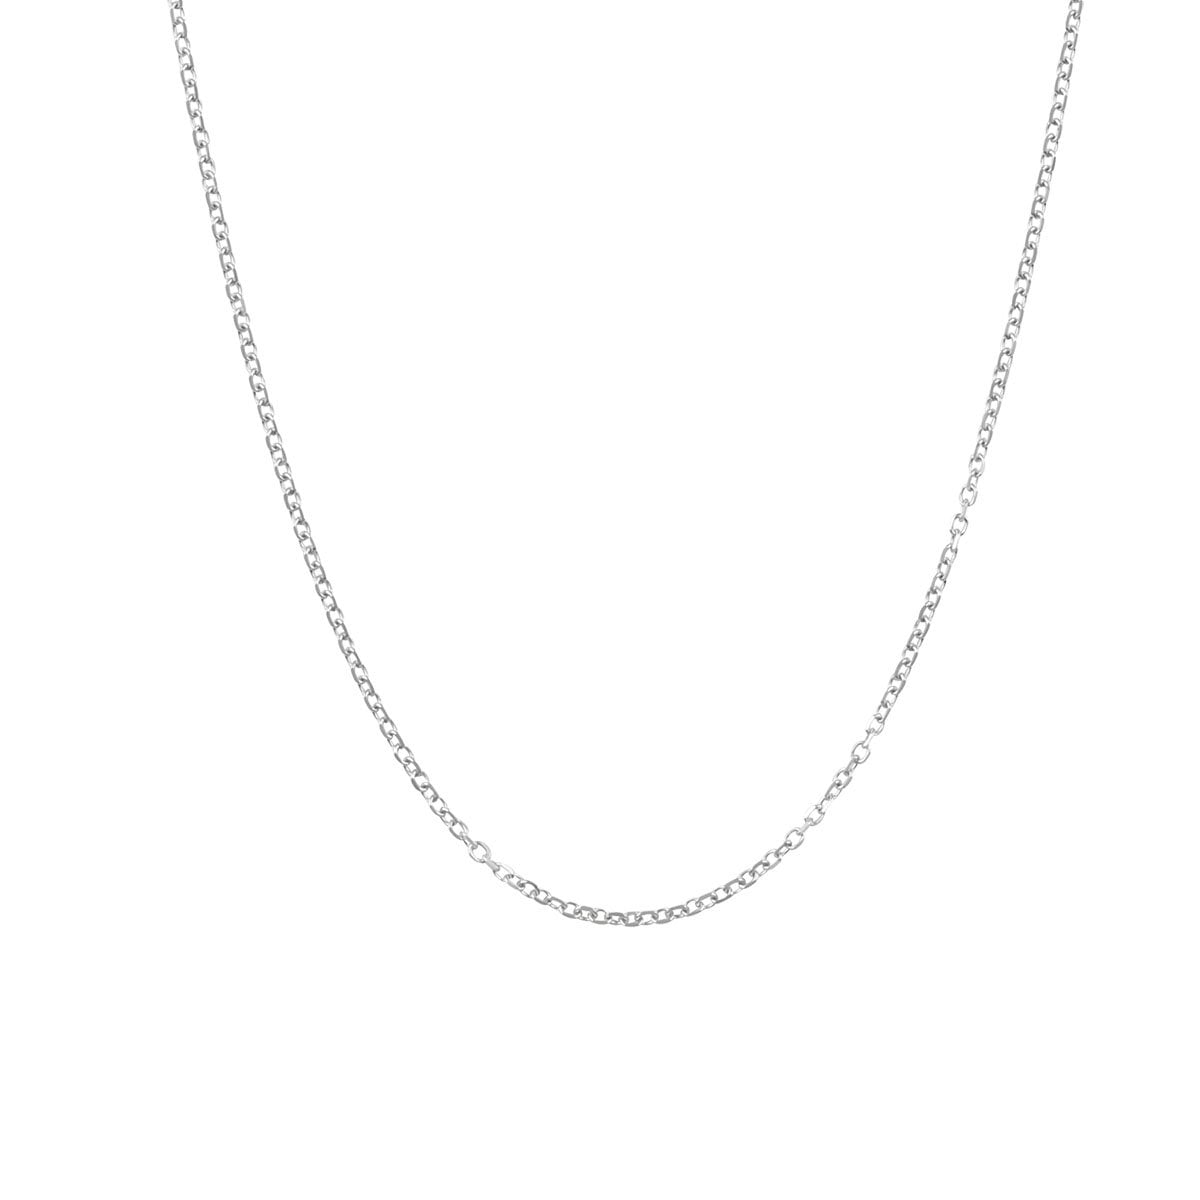 Noemi 18ct White Gold Oval Link Chain